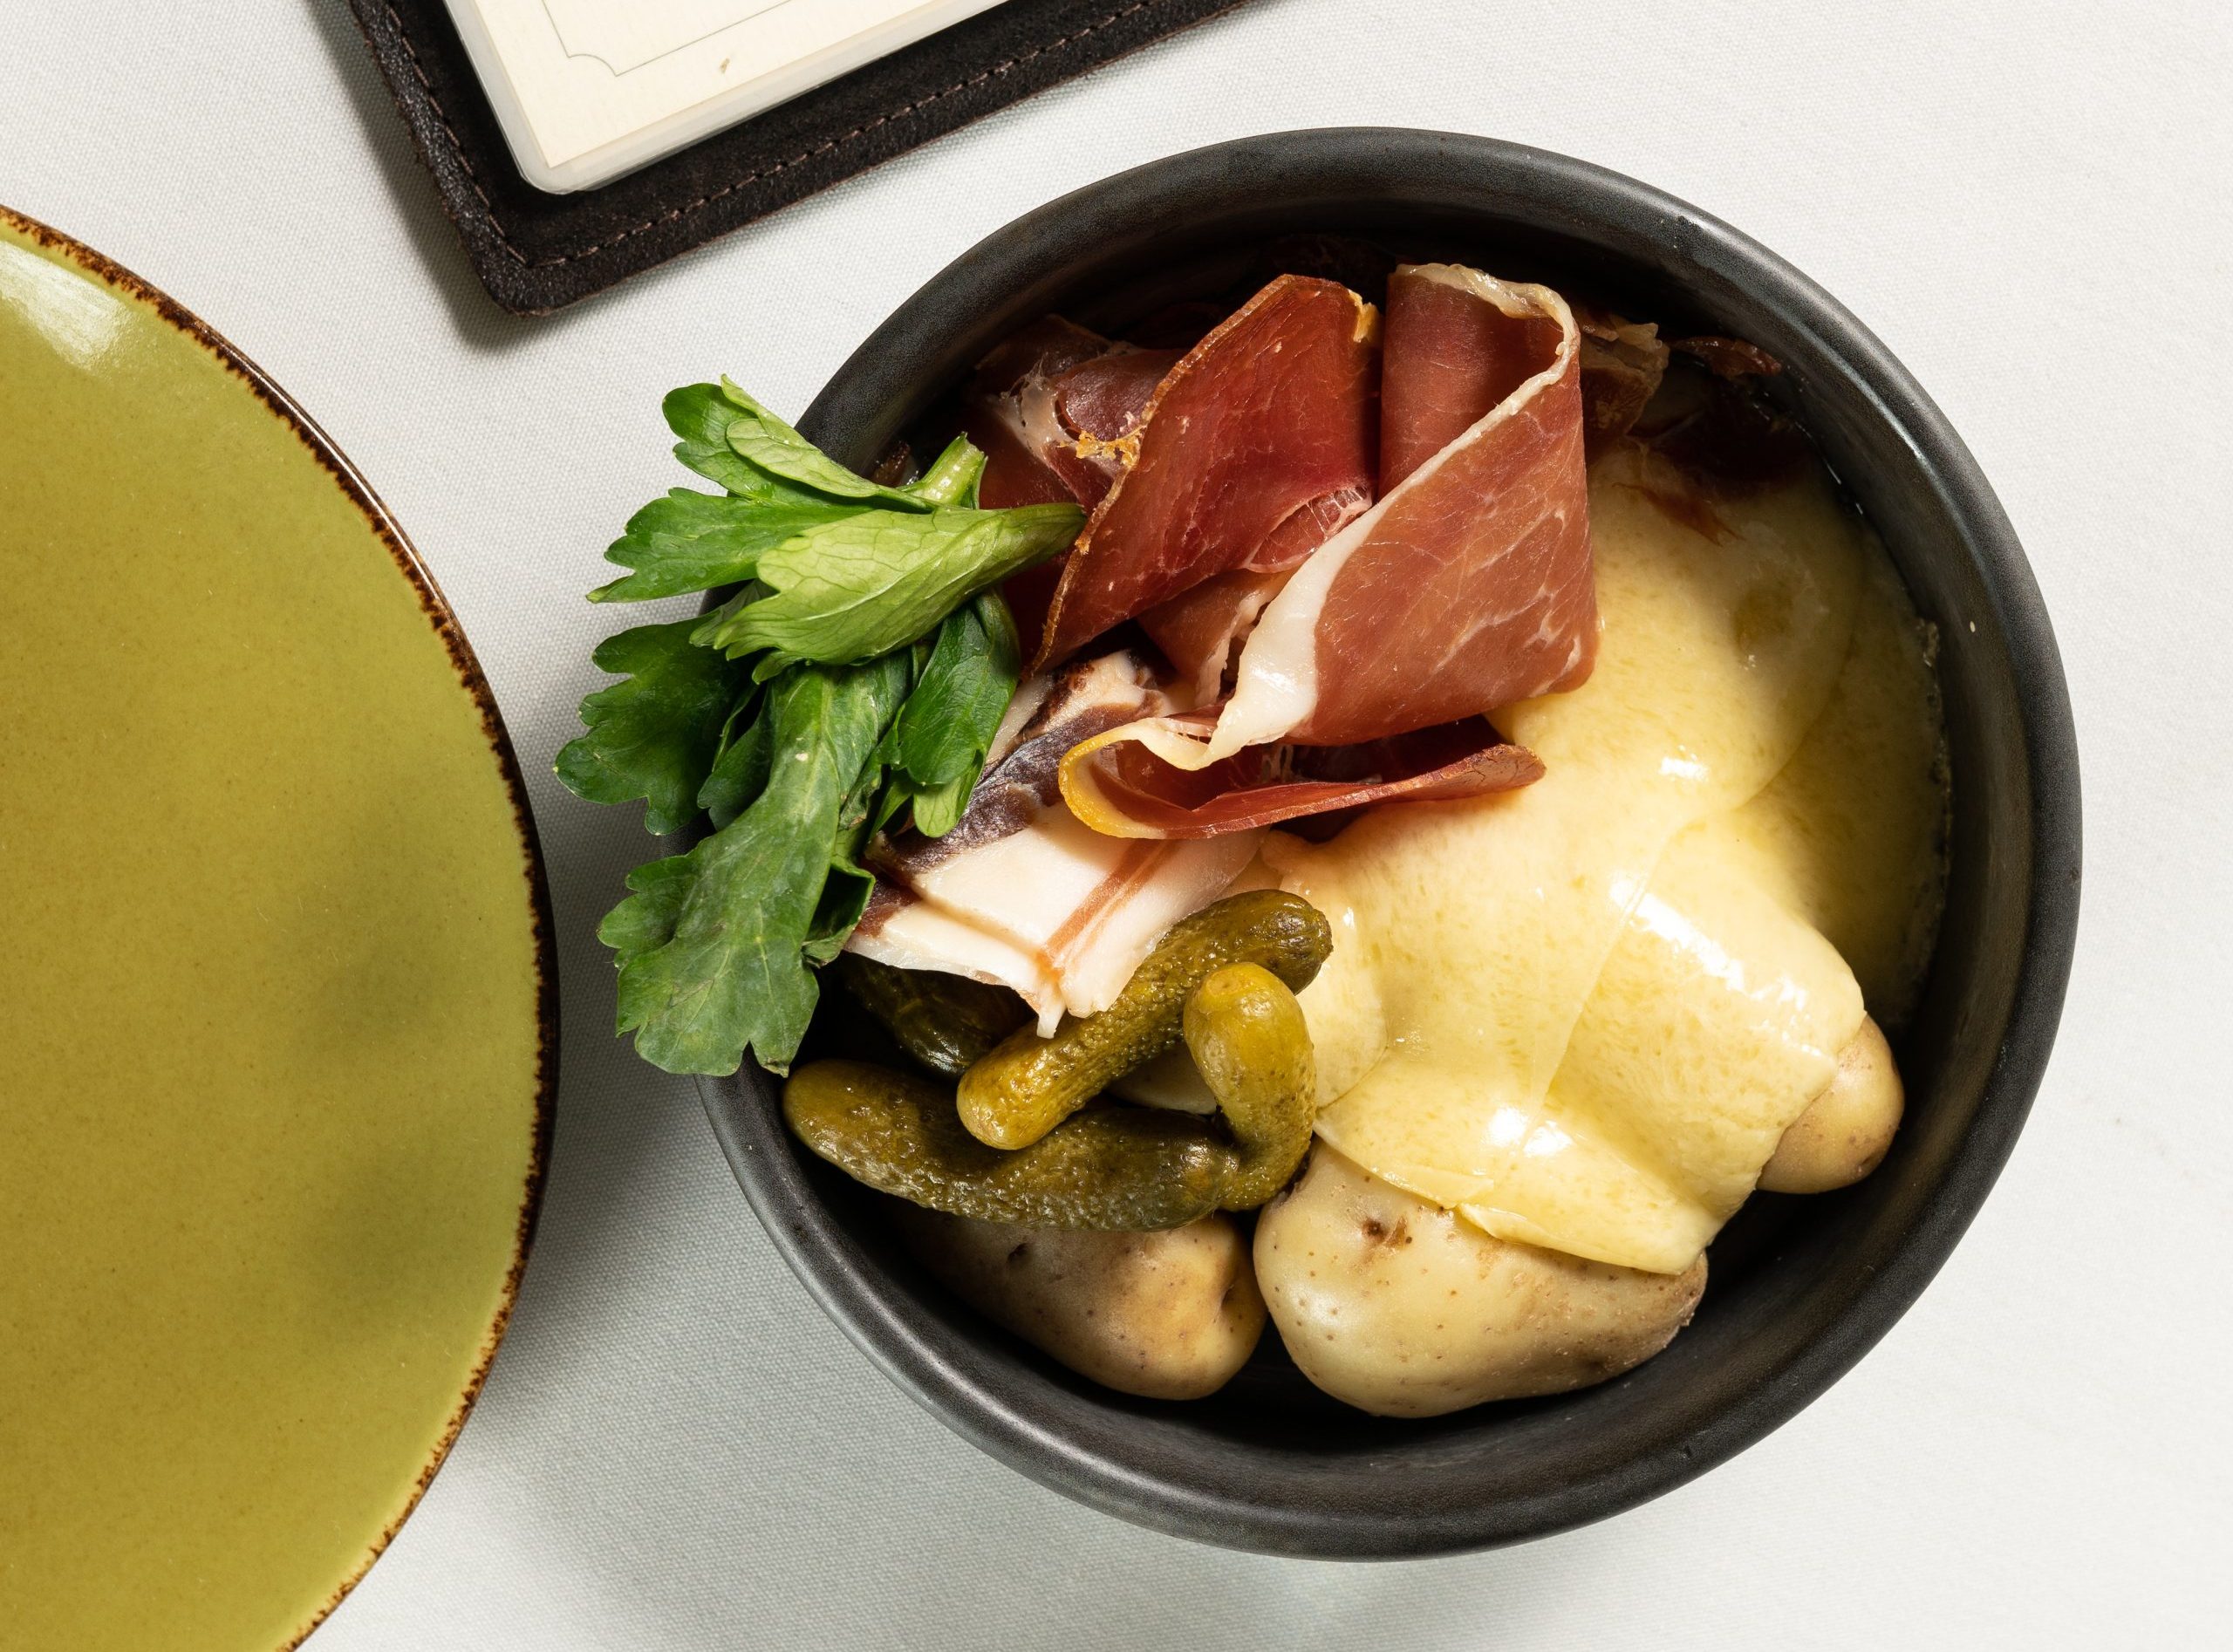 TUESDAY RACLETTE SPECIAL